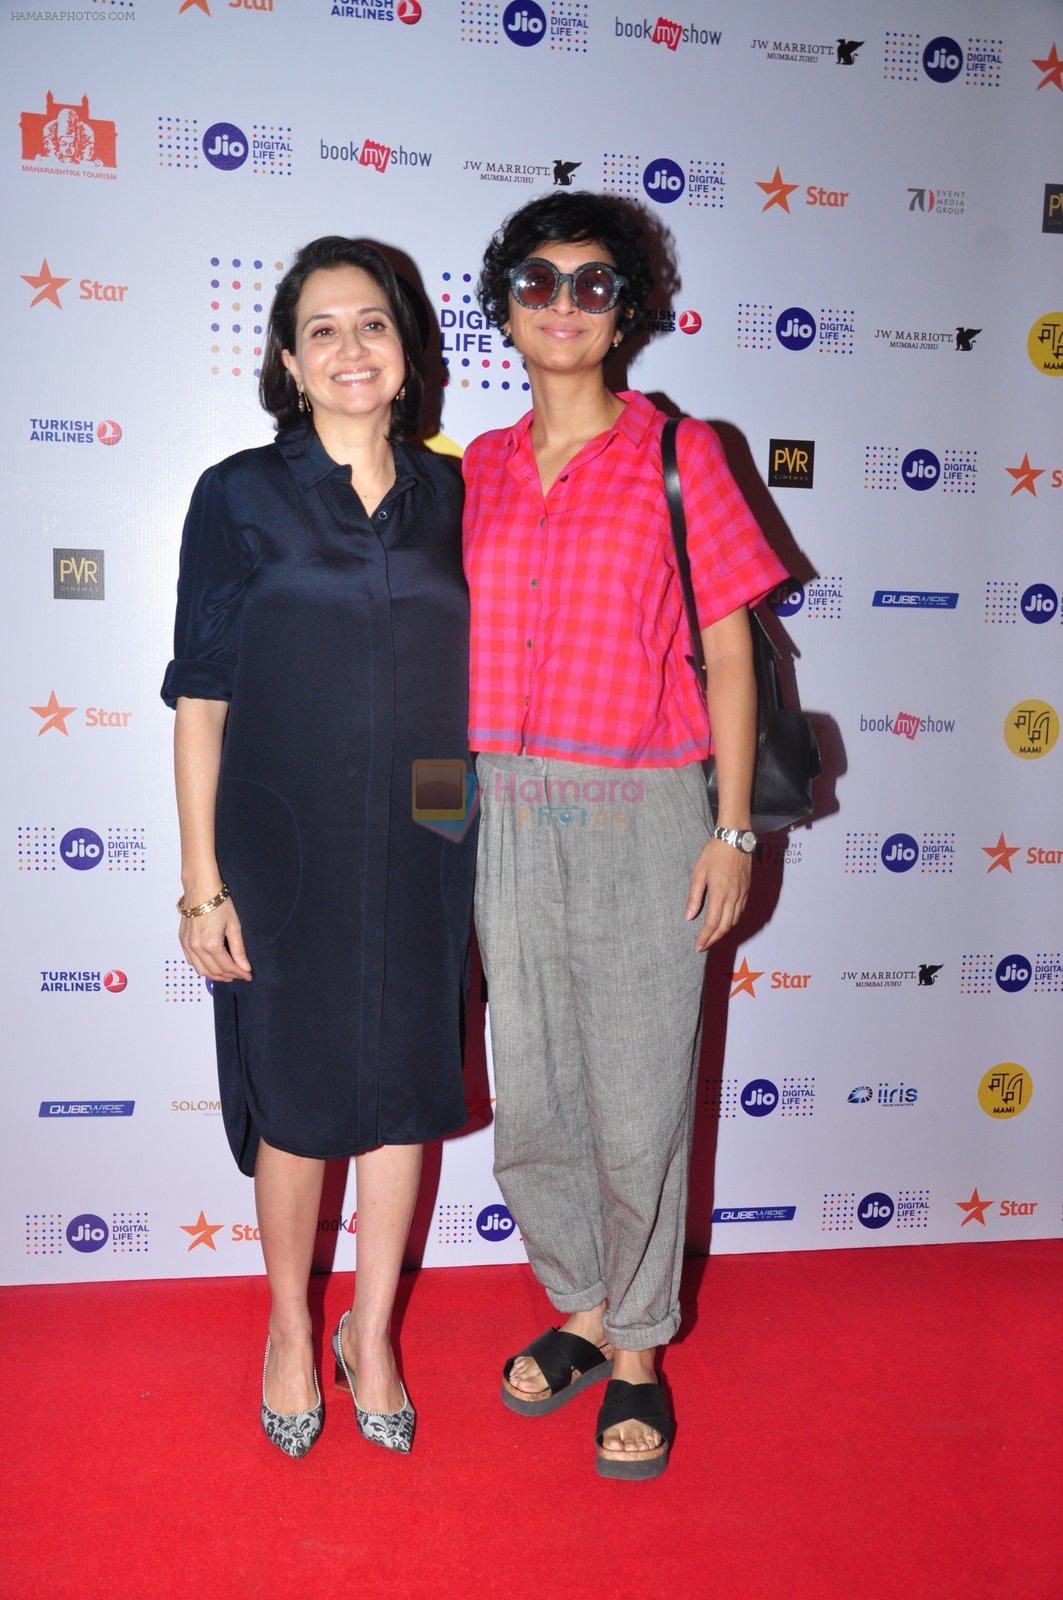 Kiran Rao grace a discussion at the MAMI 18th Mumbai Film Festival 2016 on 27th Oct 2016